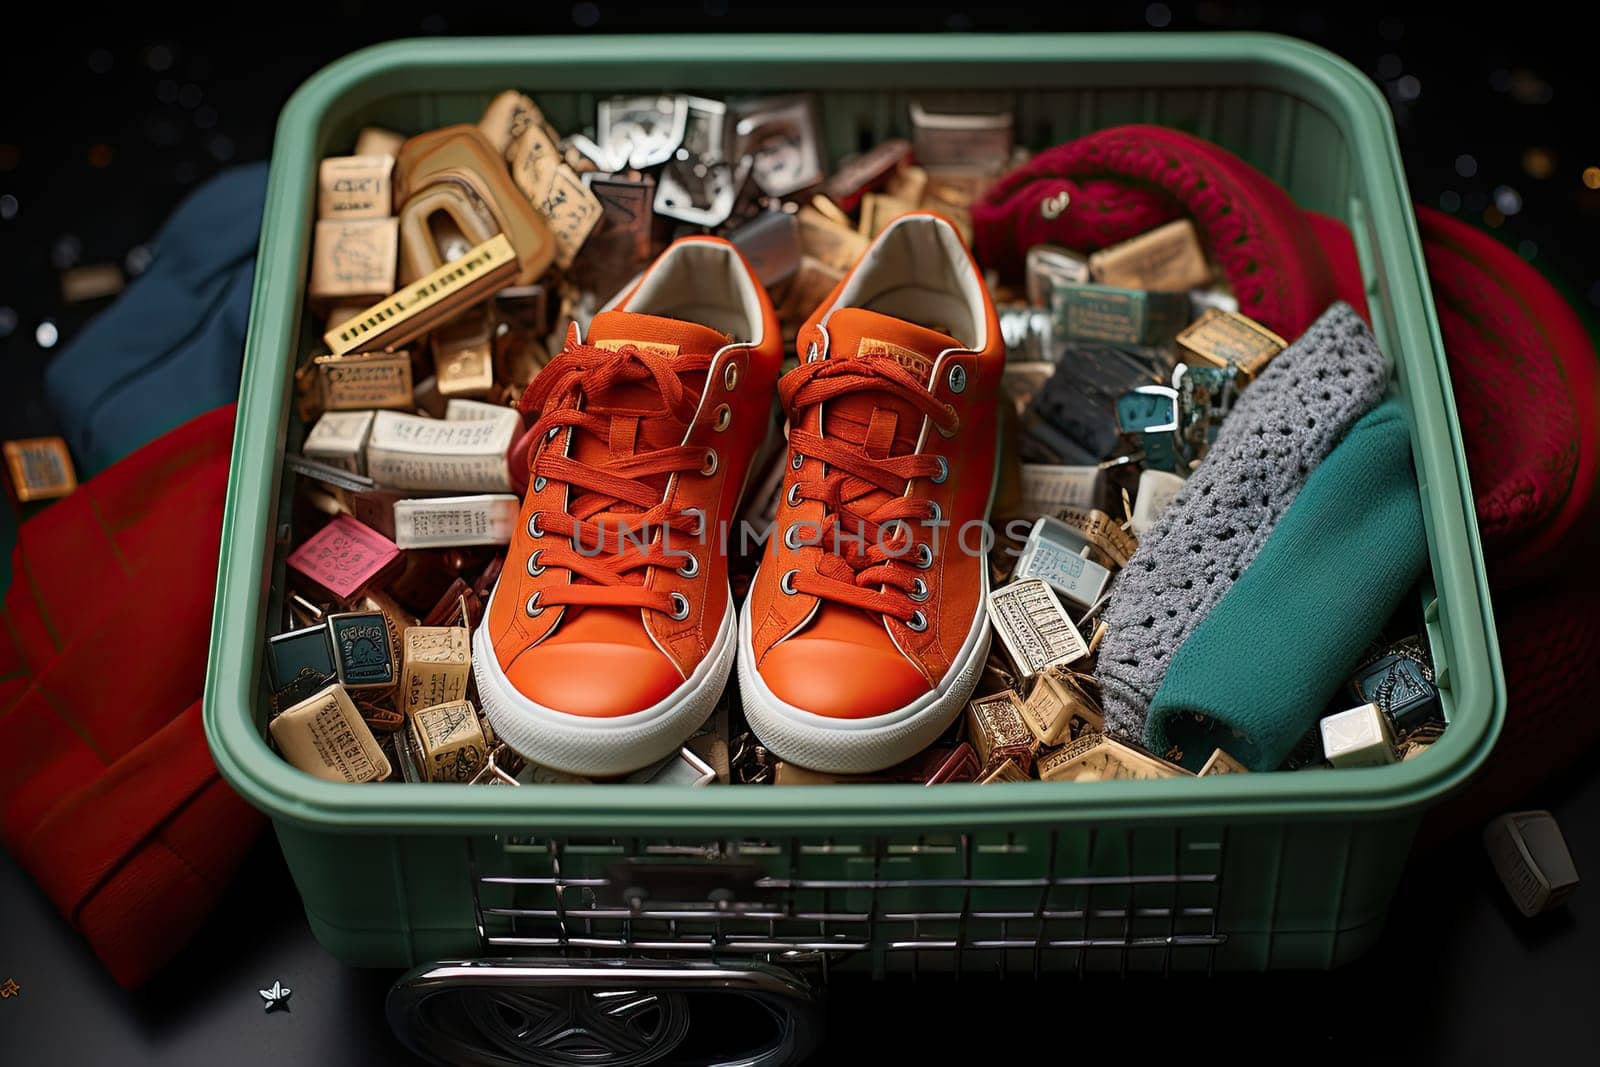 some shoes in a green container on a black surface with other items scattered around it, including socks and socks